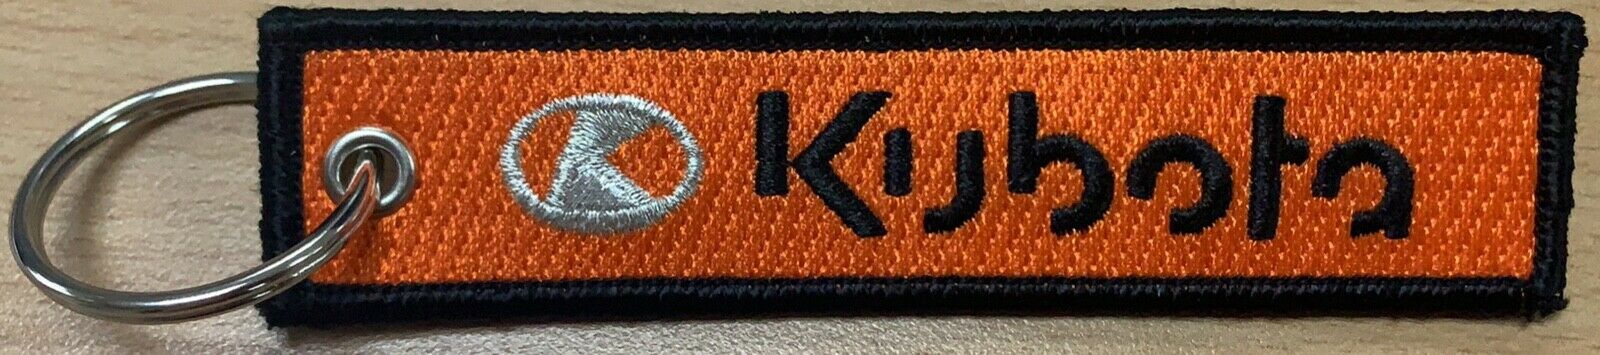 Kubota Embroidered Key Chain, Agriculture, Garden, Golf, Construction Equipment